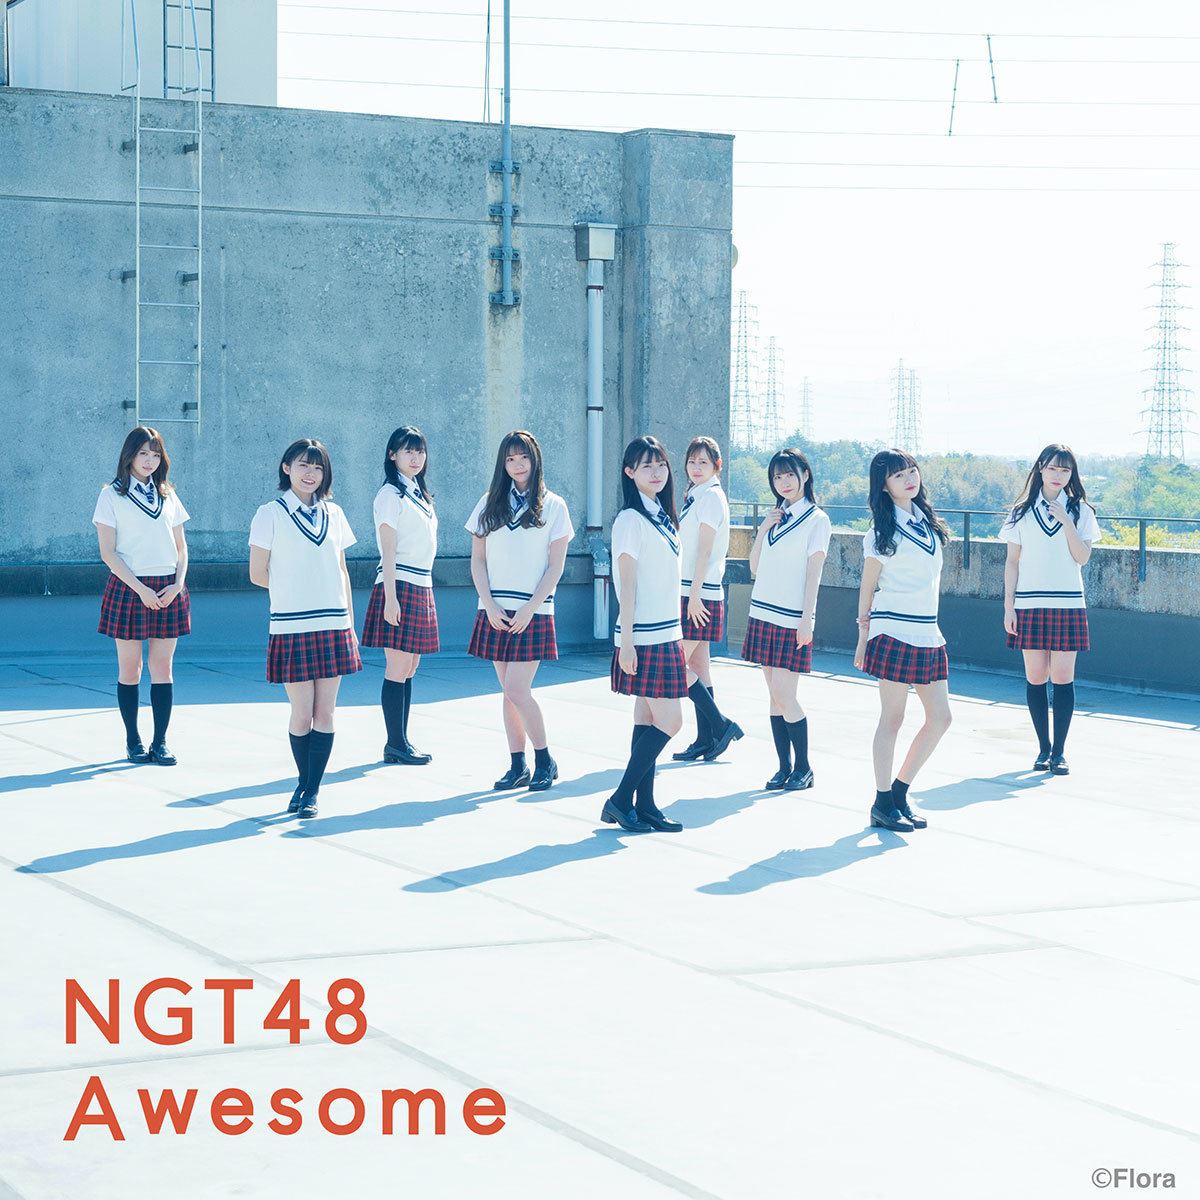 NGT48 6thシングル『Awesome』通常盤Type-Aジャケット  (C)Flora